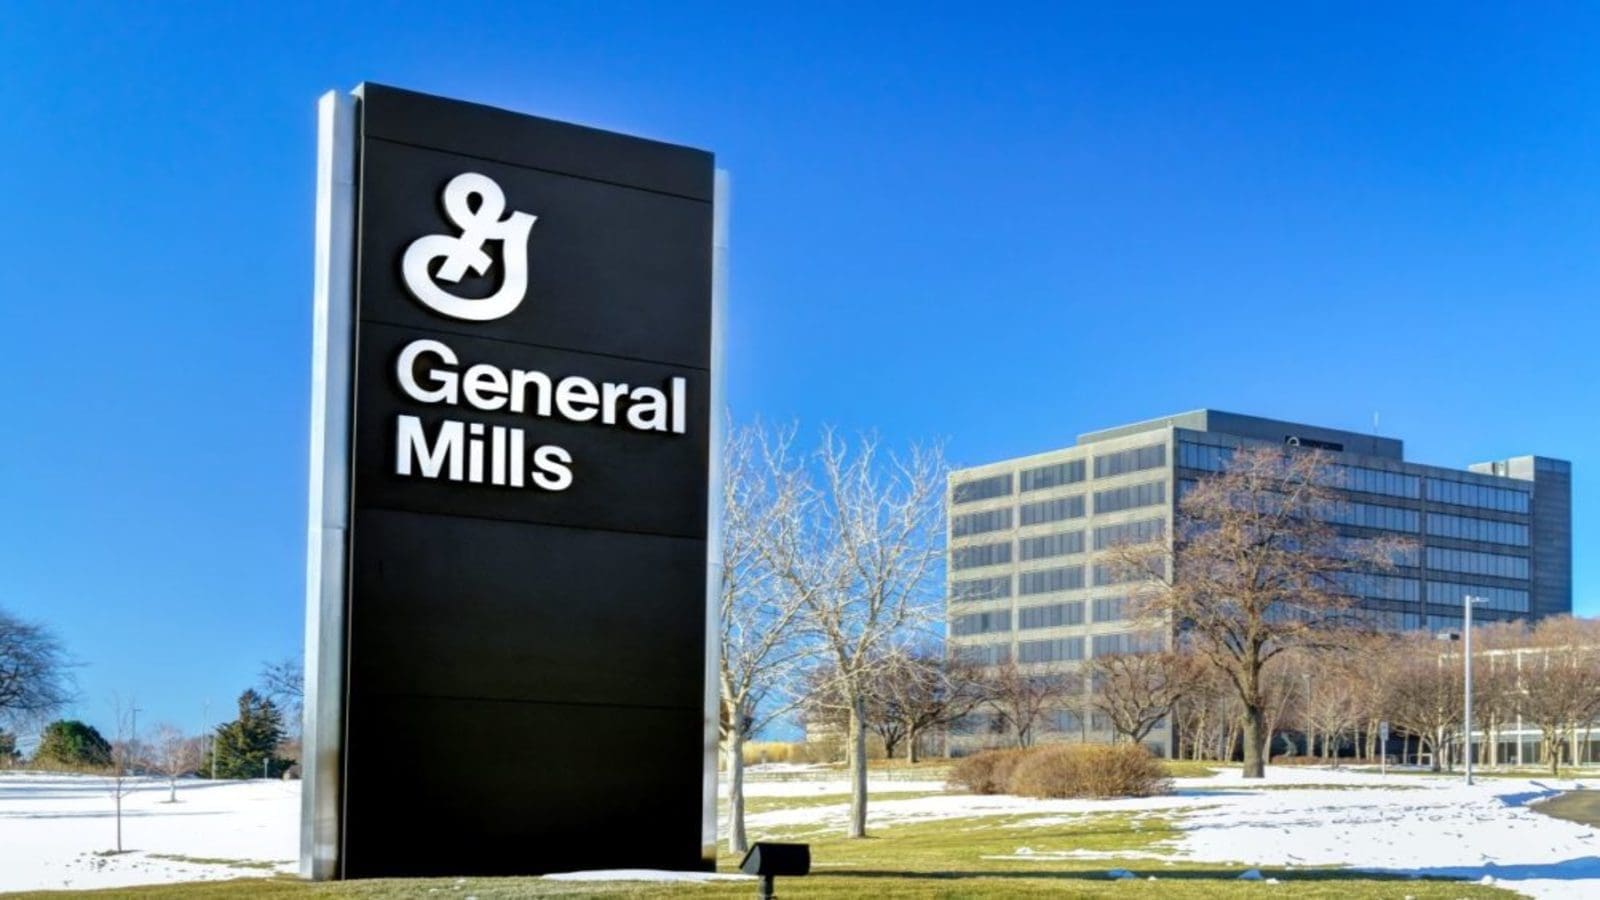 General Mills yet to cope with elevated operating costs 4 years post-pandemic